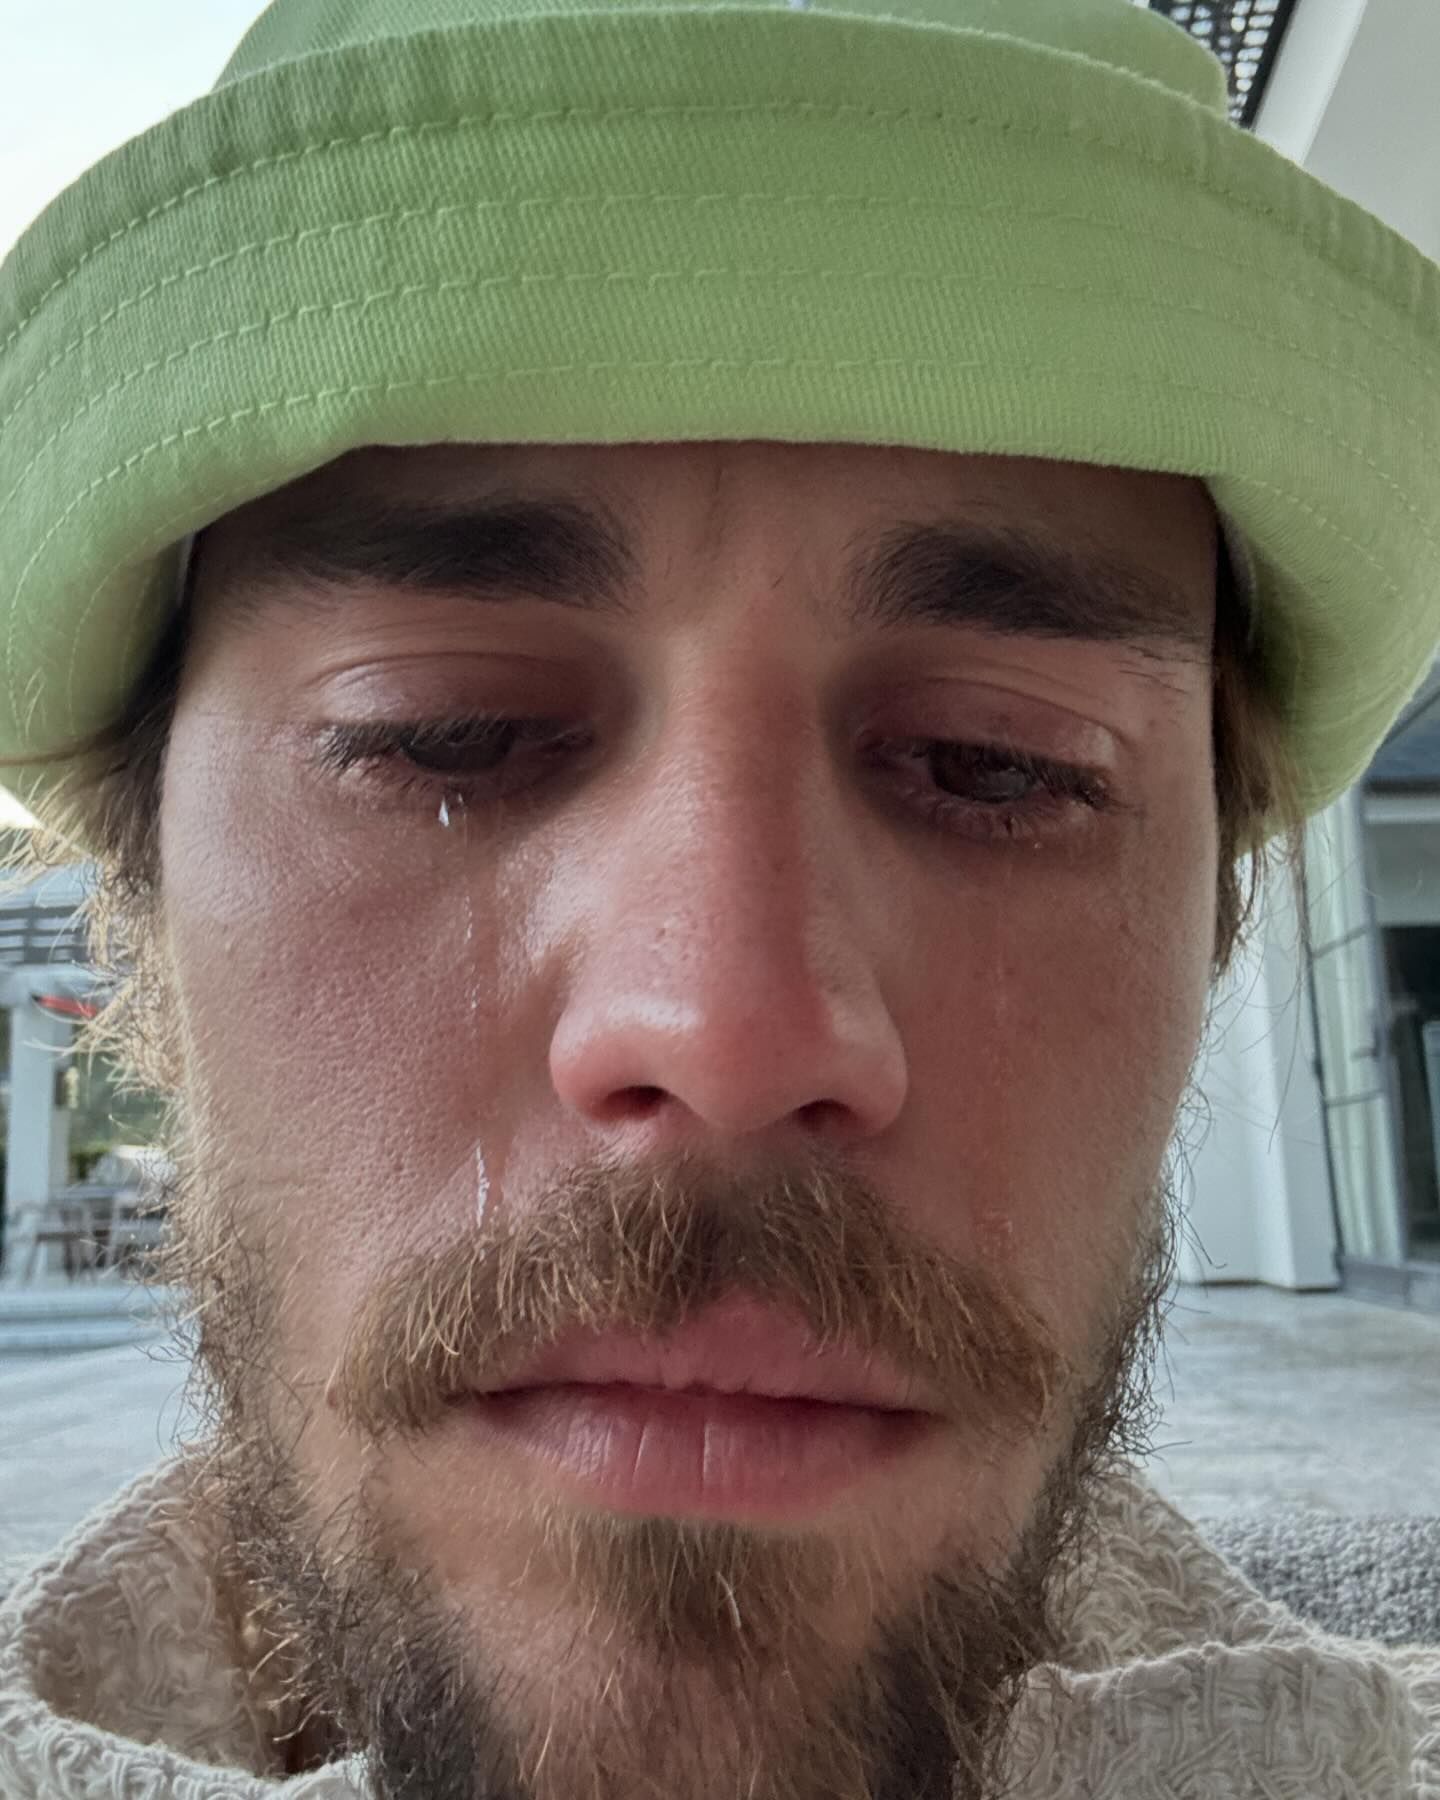 Justin Bieber shares photo of himself crying, causing concern among fans, followed by a response from his wife Hailey